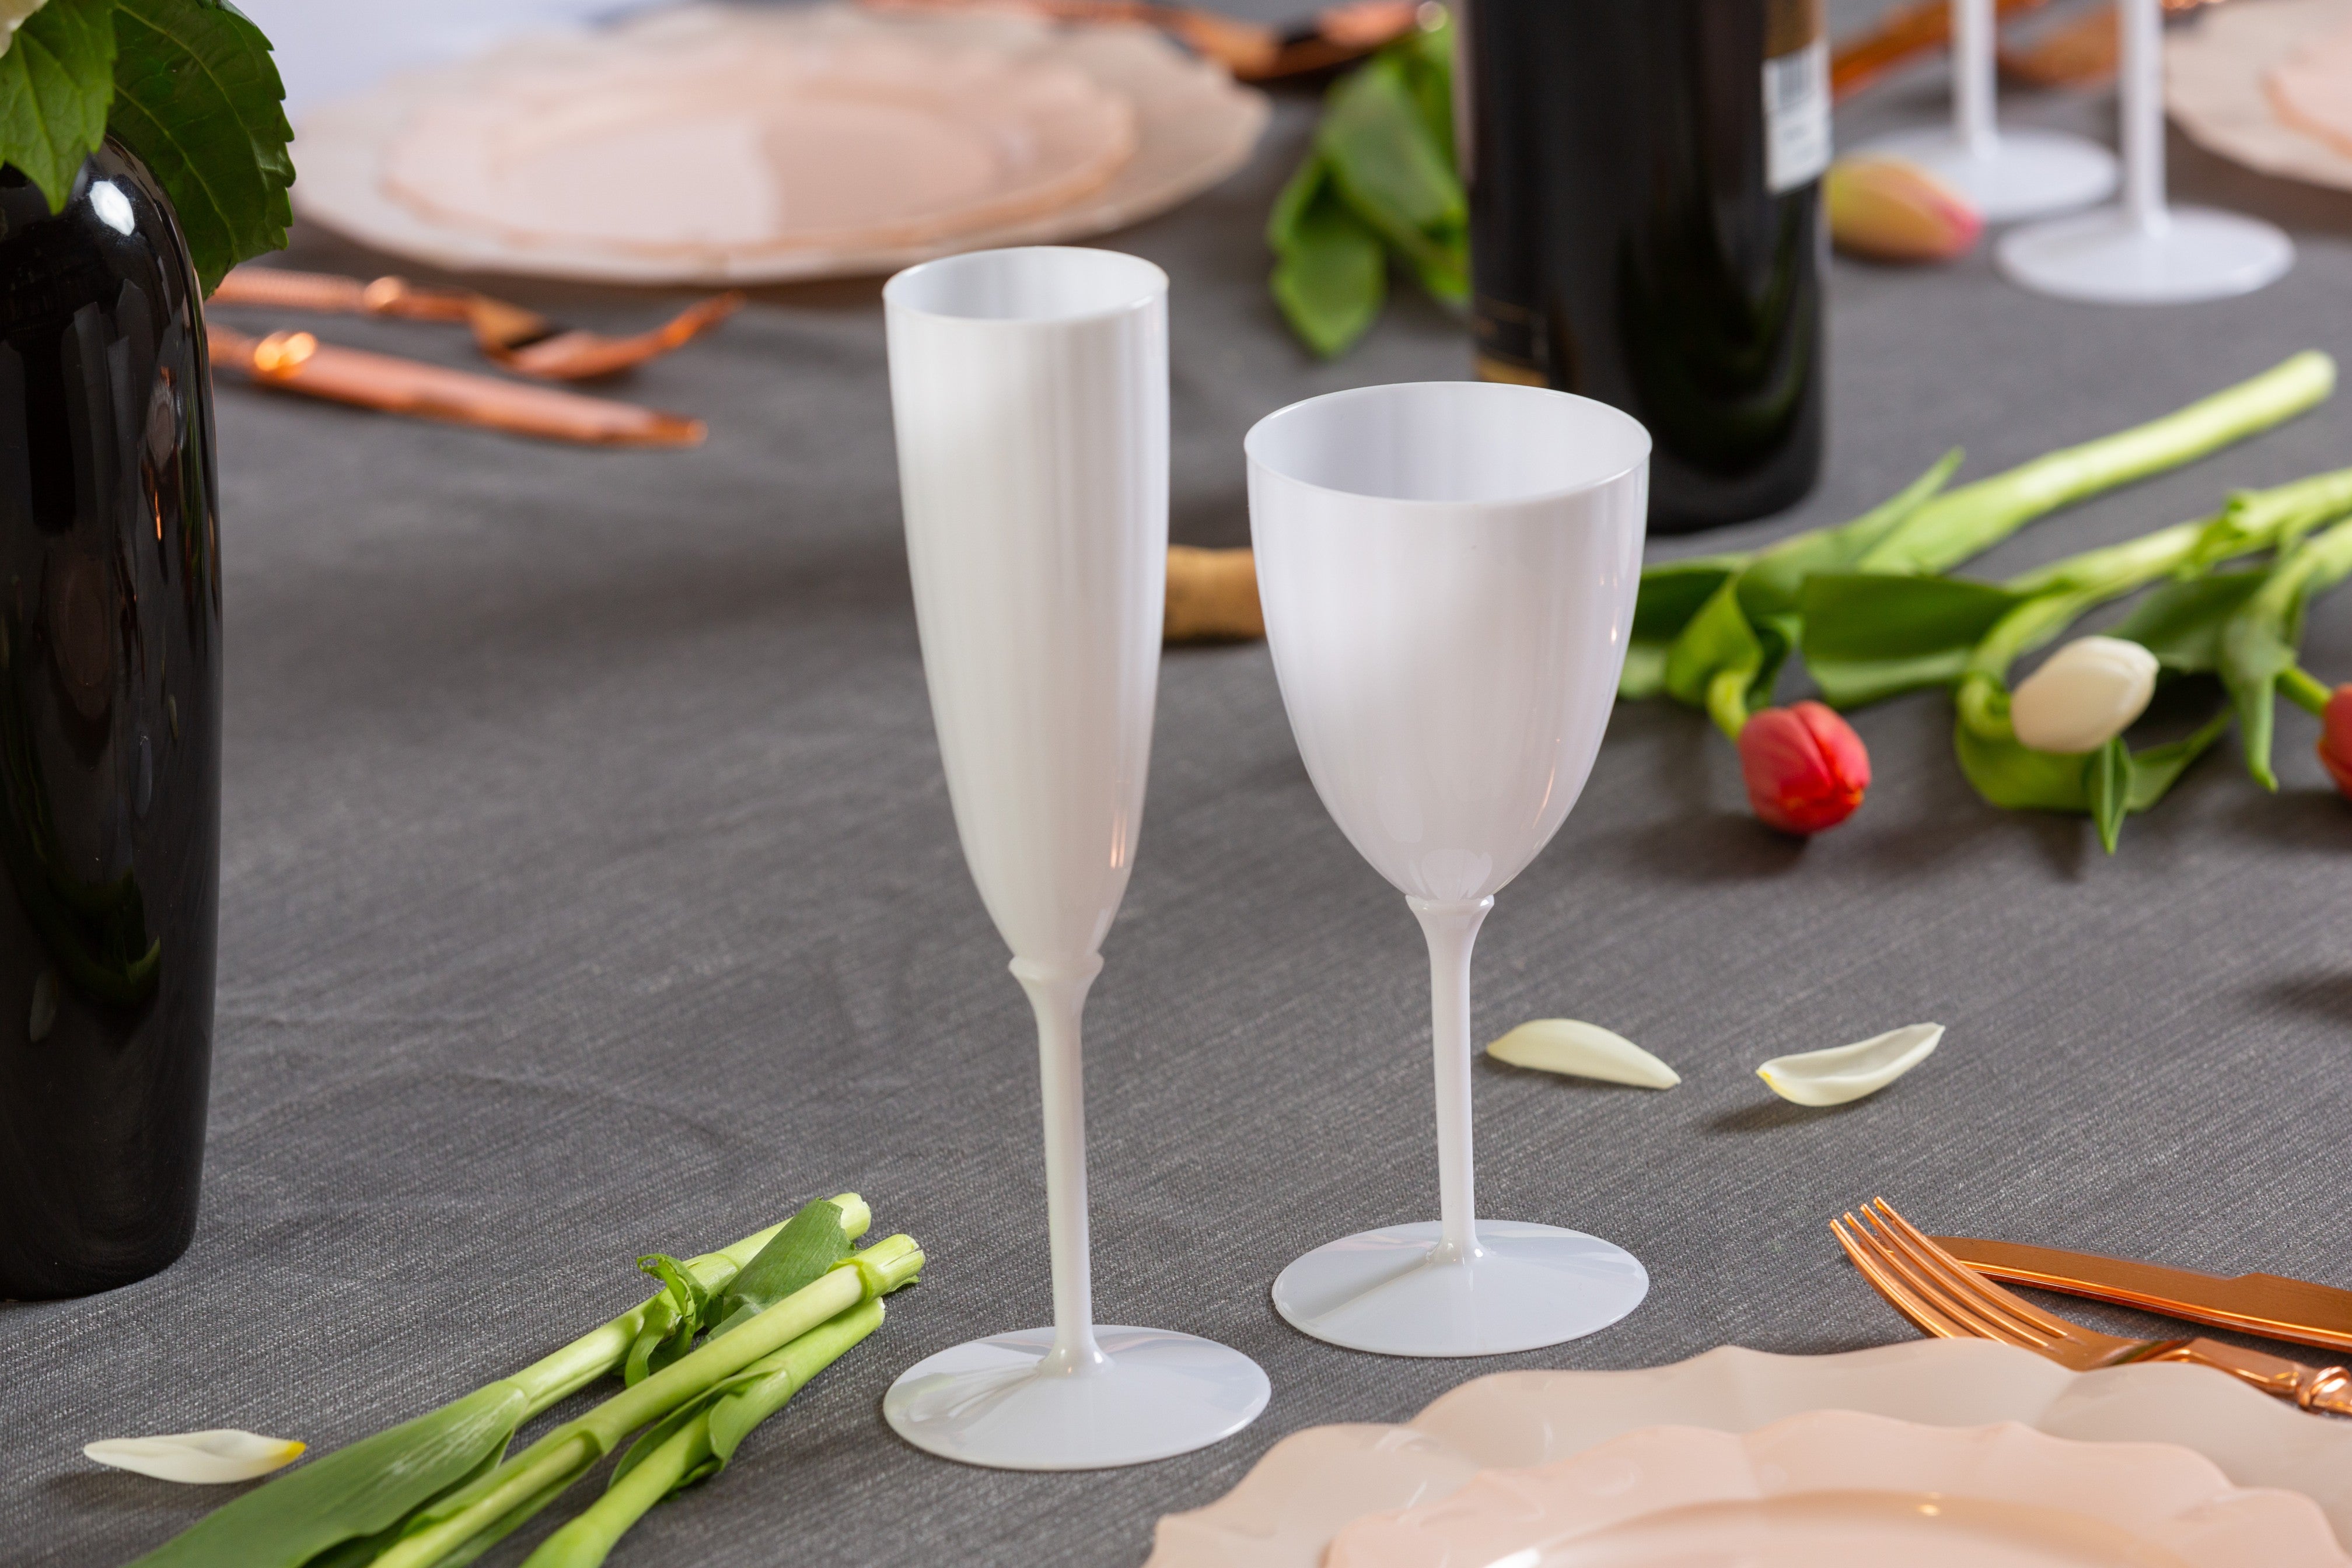 4-oz White Plastic Champagne Flute Perfect for Weddings Catered Events and Bars One Piece Design 100-ct Restaurantware